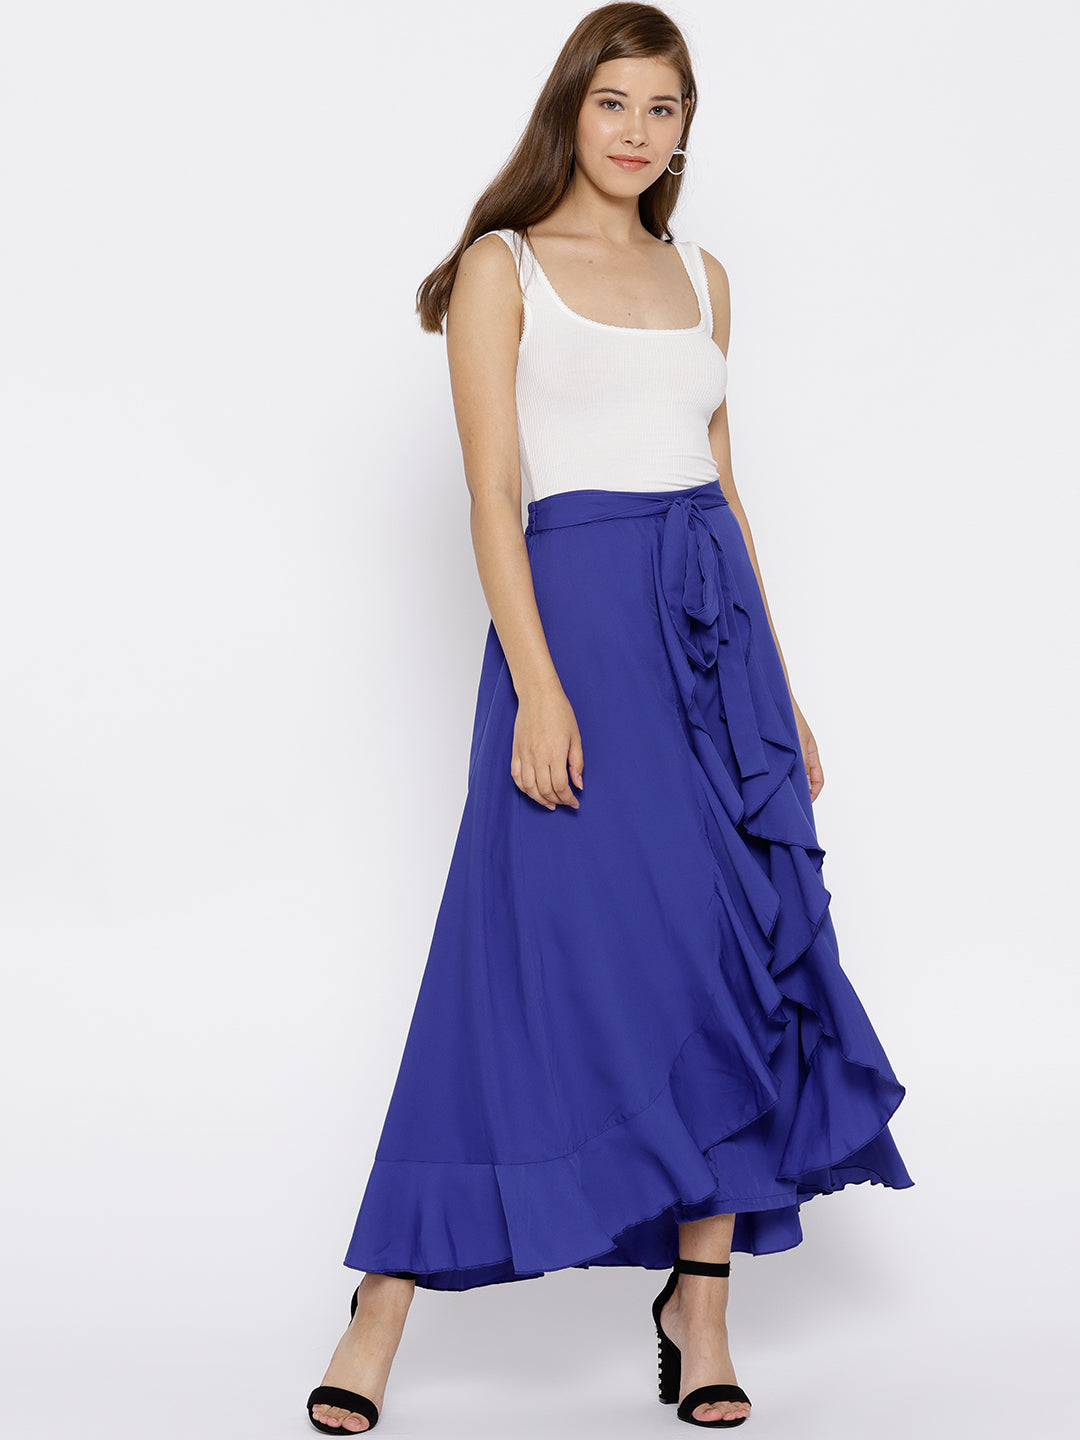 Blue Solid Ruffled Flared Maxi Skirt with Attached Trousers - Berrylush